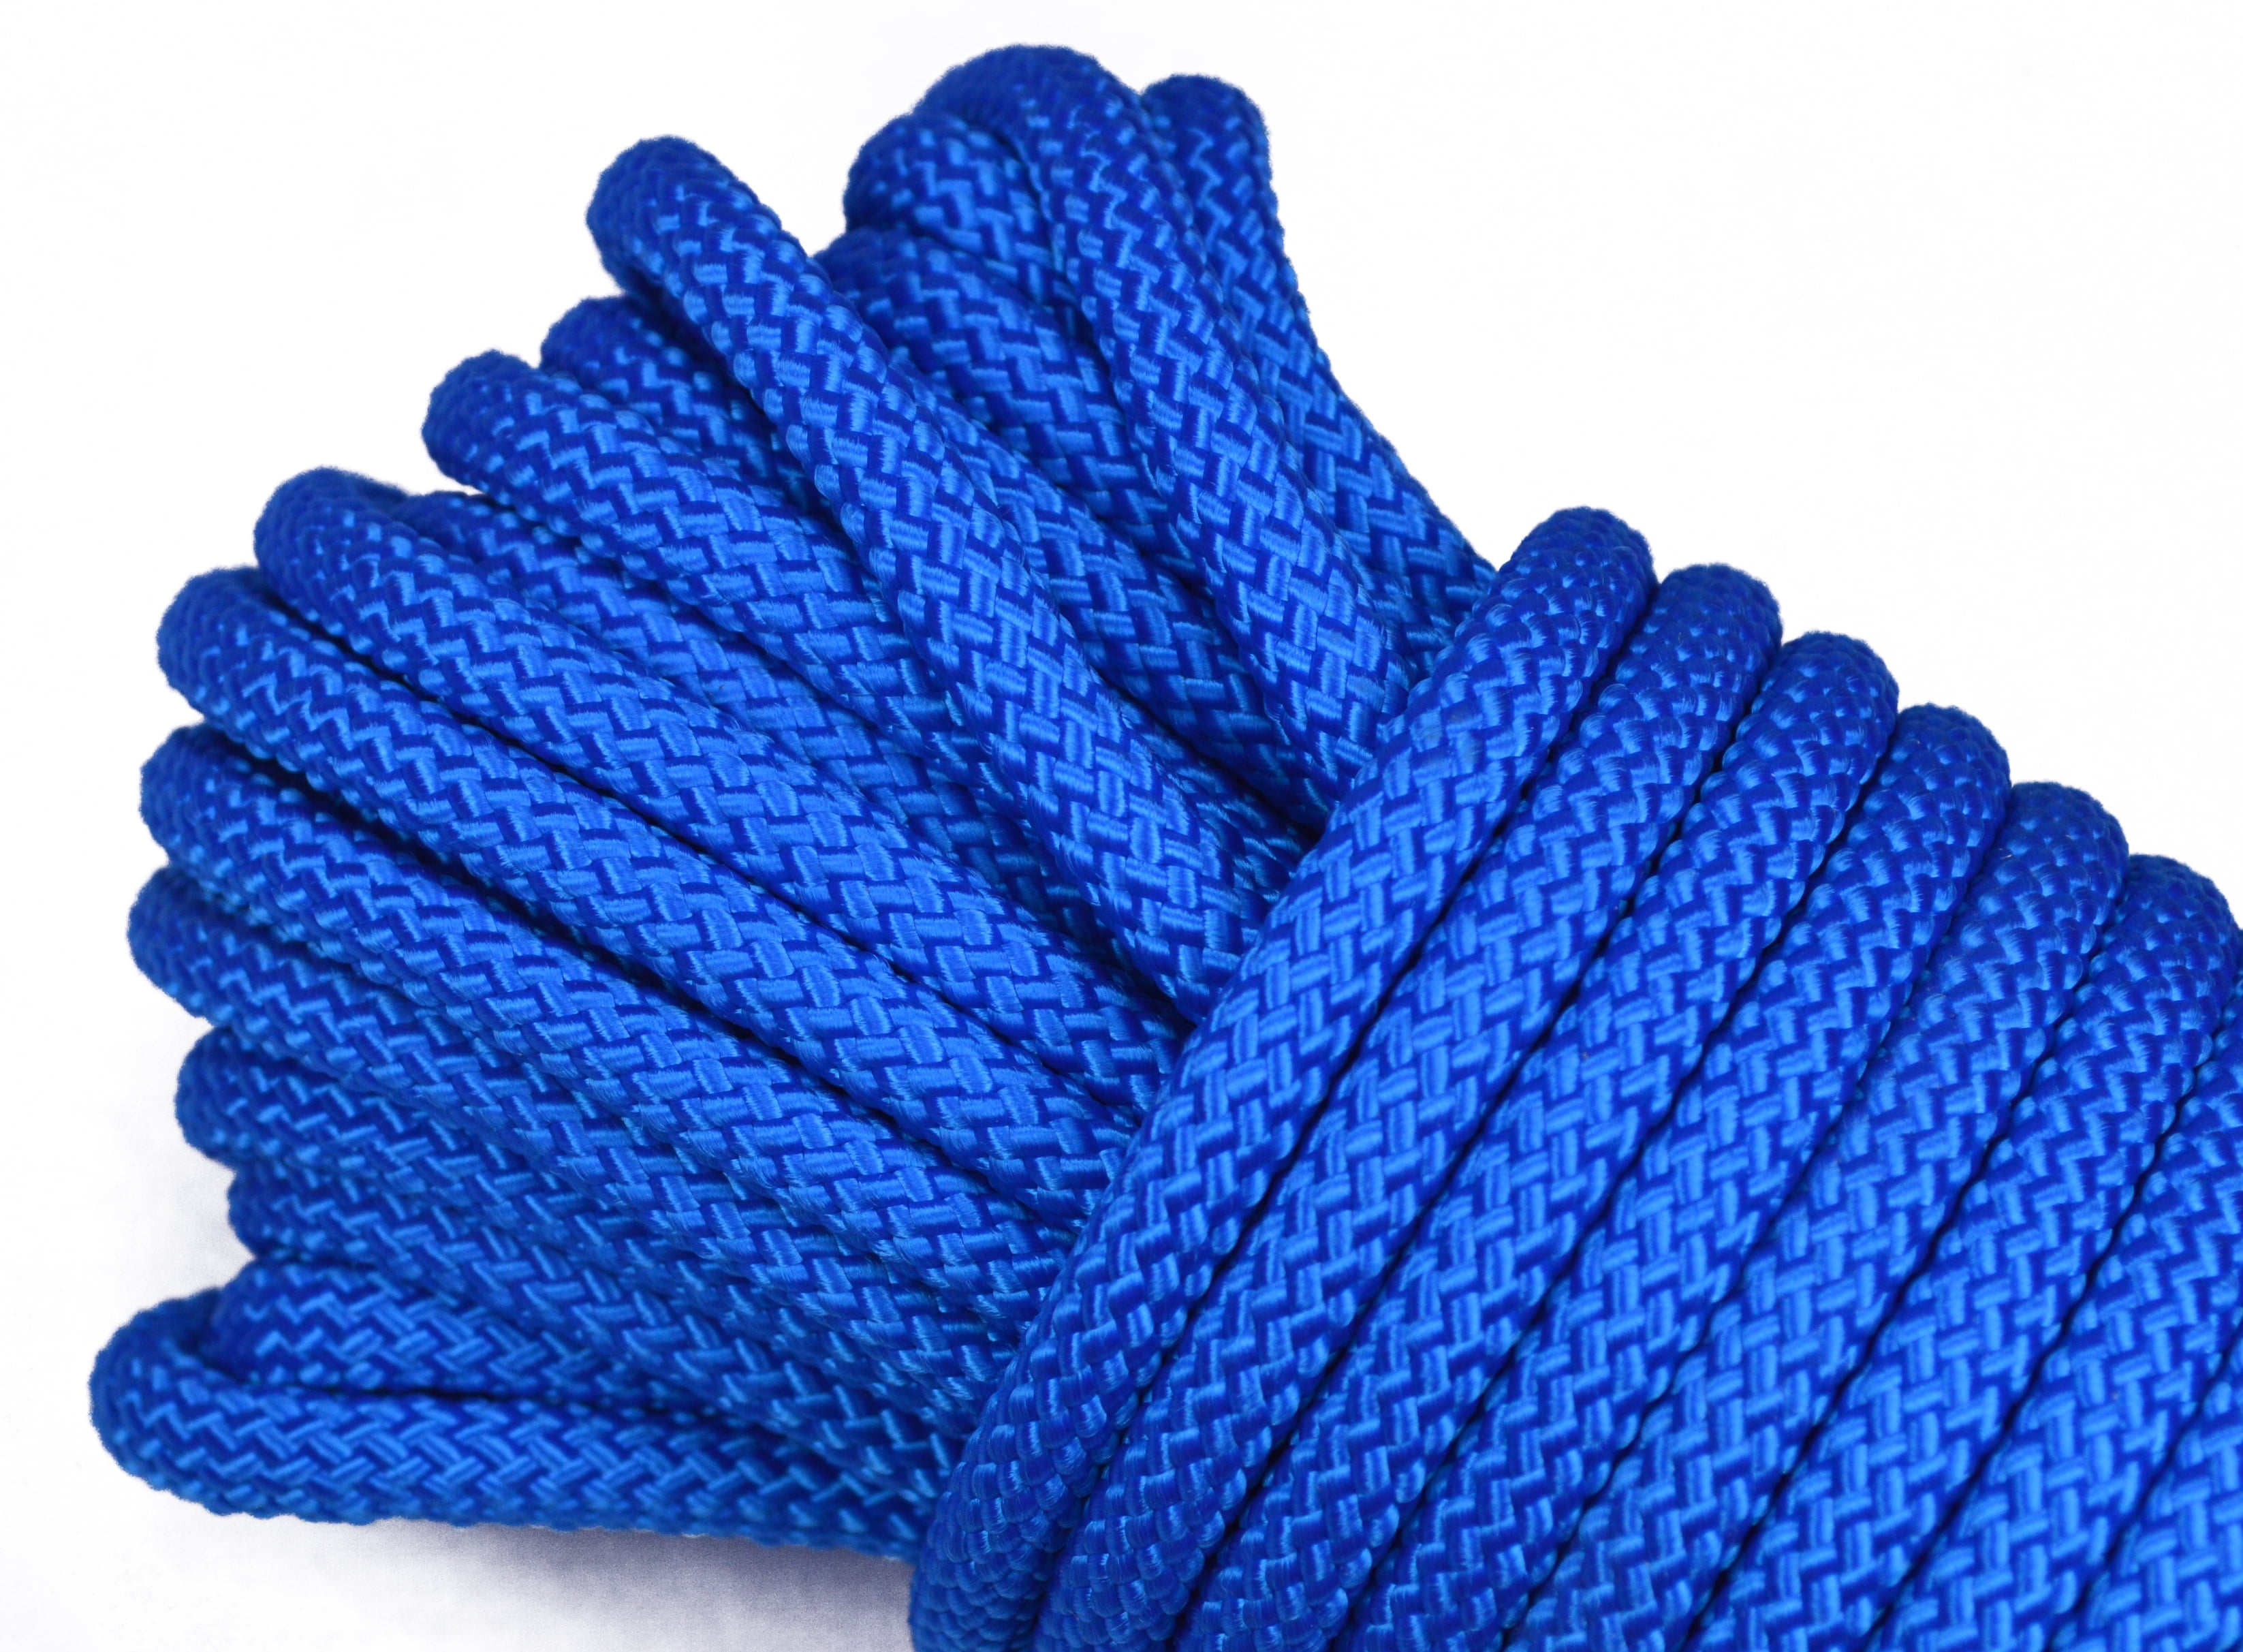 Details about   4mm Double Braid Polypropylene Rope Extra Strong Nylon Para Cord Marine Cord New 